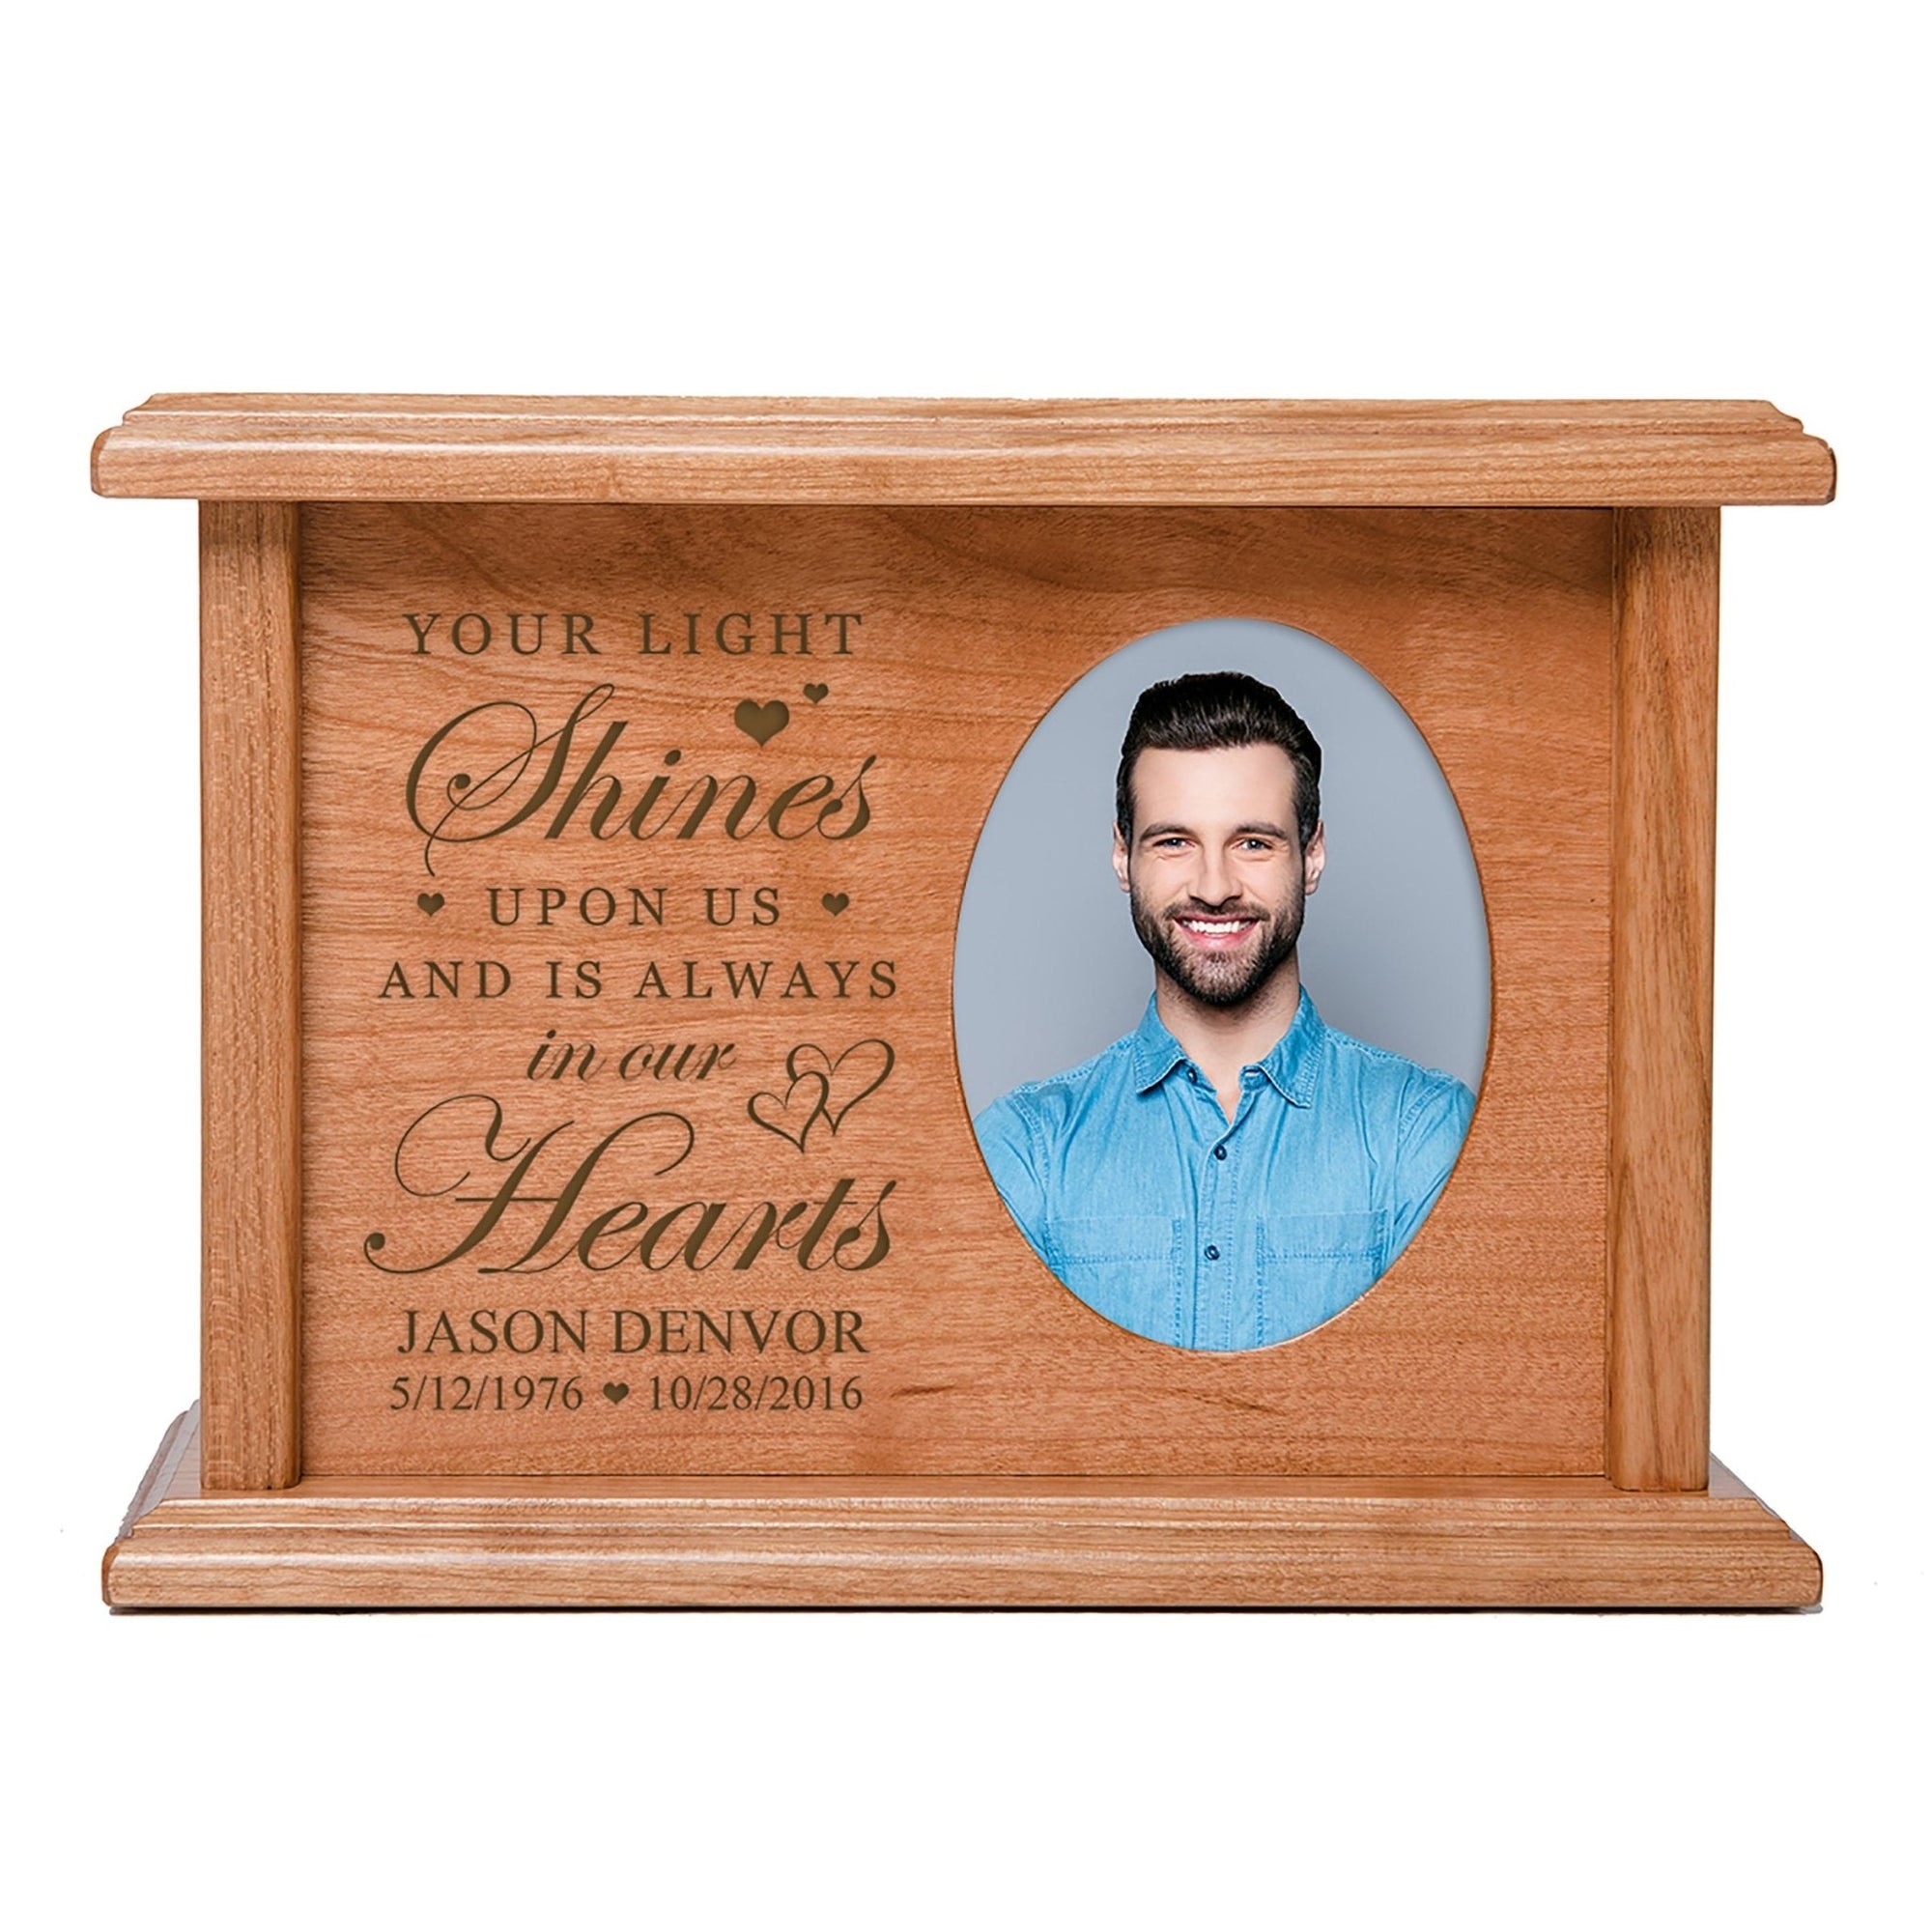 Custom Memorial Cremation Urn Box for Human Ashes holds 2x3 photo and holds 65 cu in Your Light Shines - LifeSong Milestones